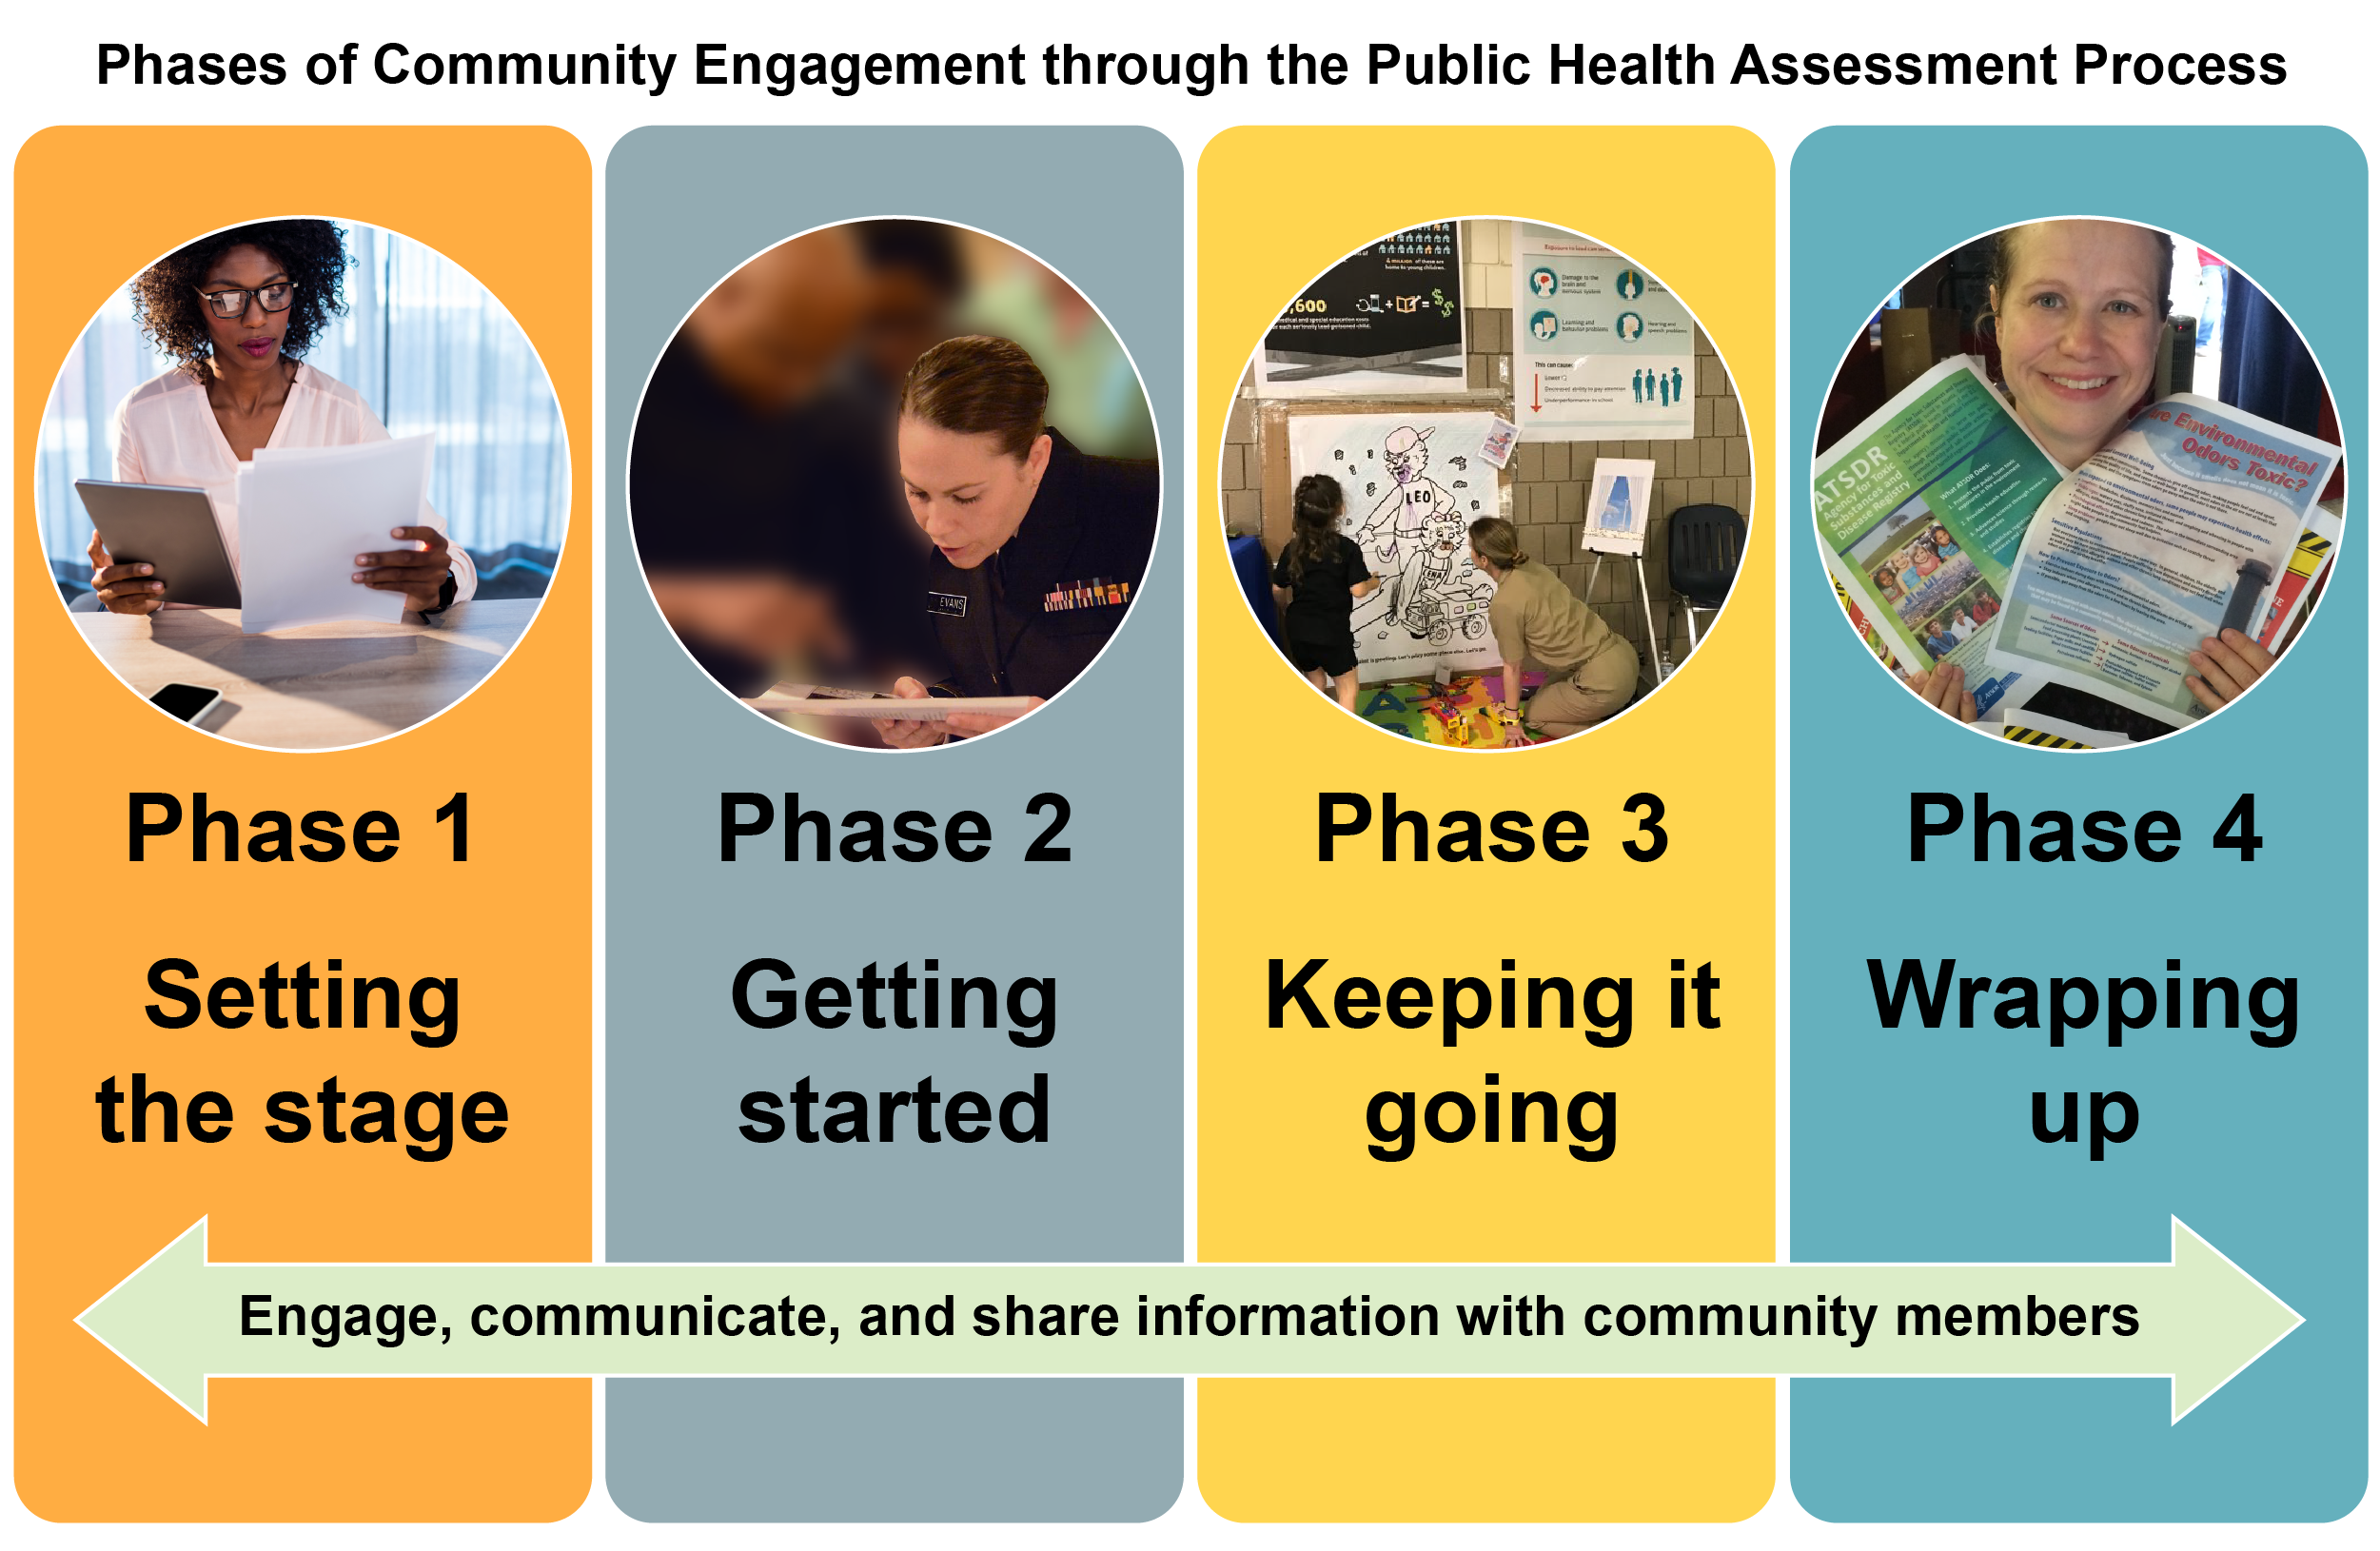 Phases of community engagement diagram. Please see full description below.